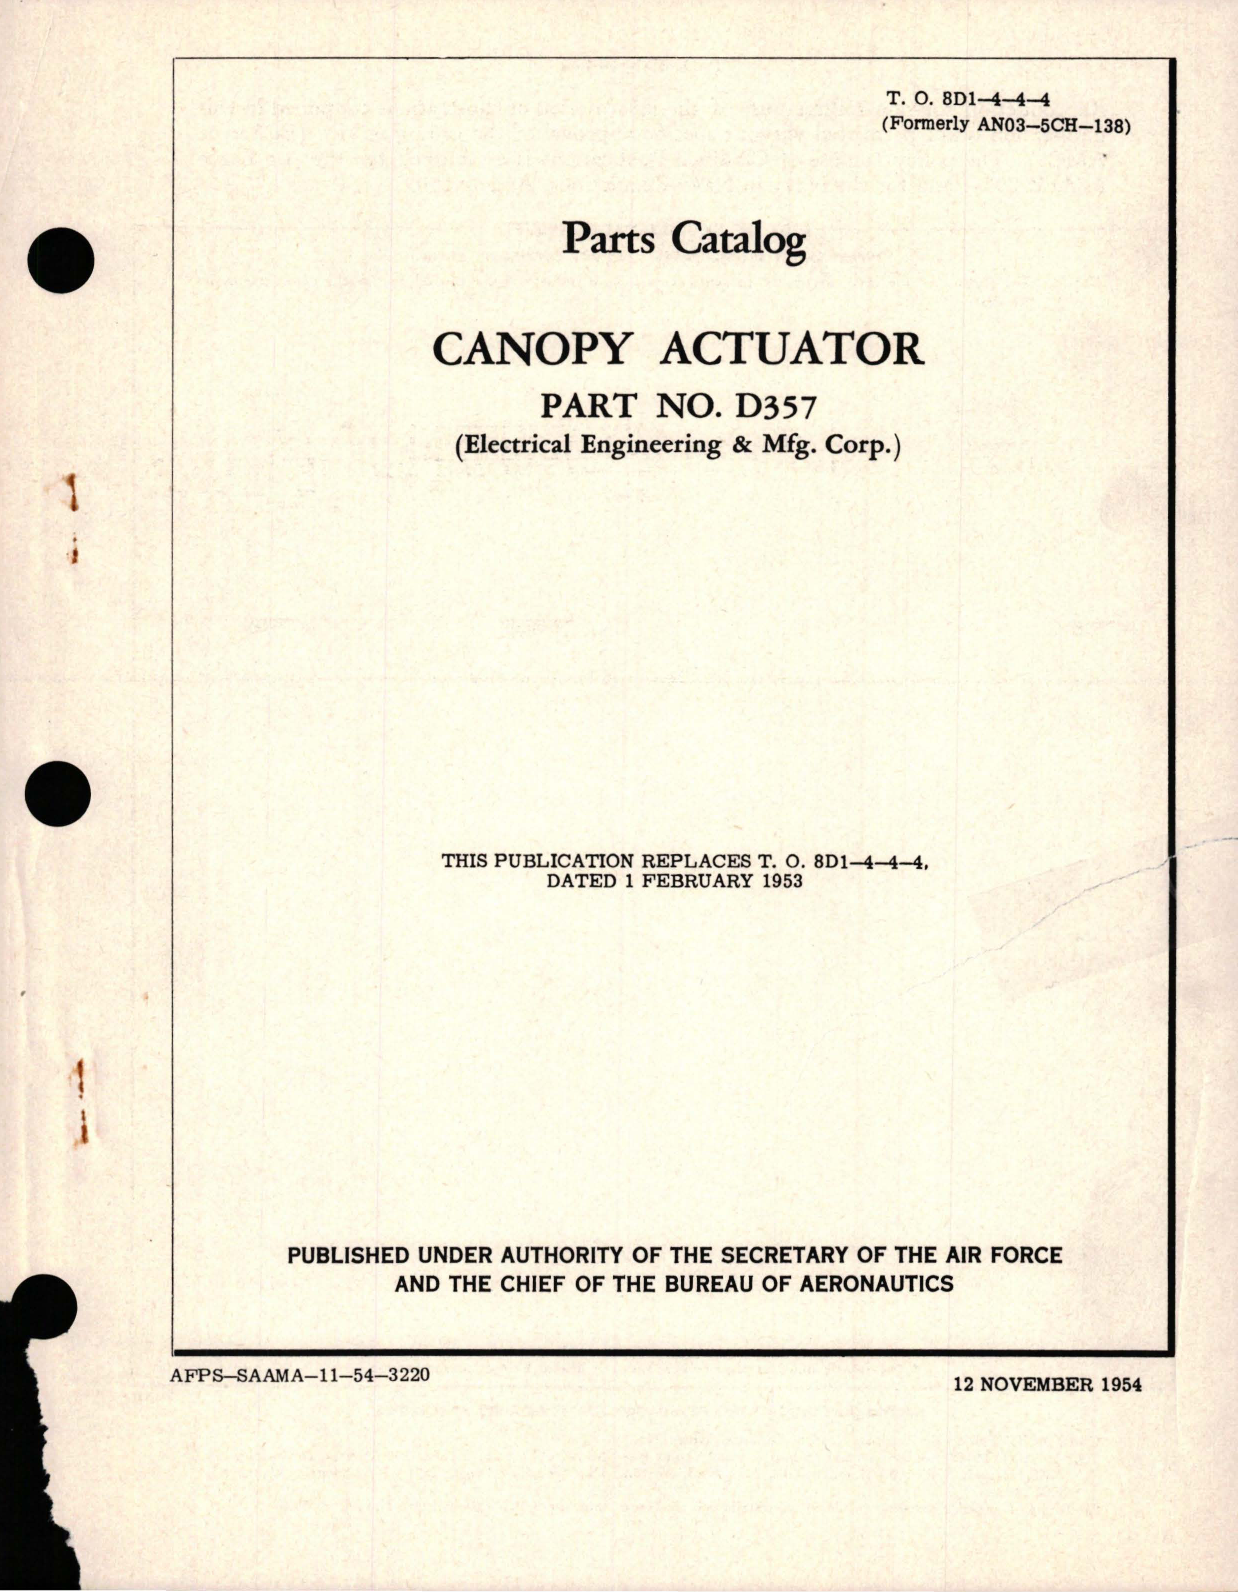 Sample page 1 from AirCorps Library document: Parts Catalog for Canopy Actuator - Part D357 